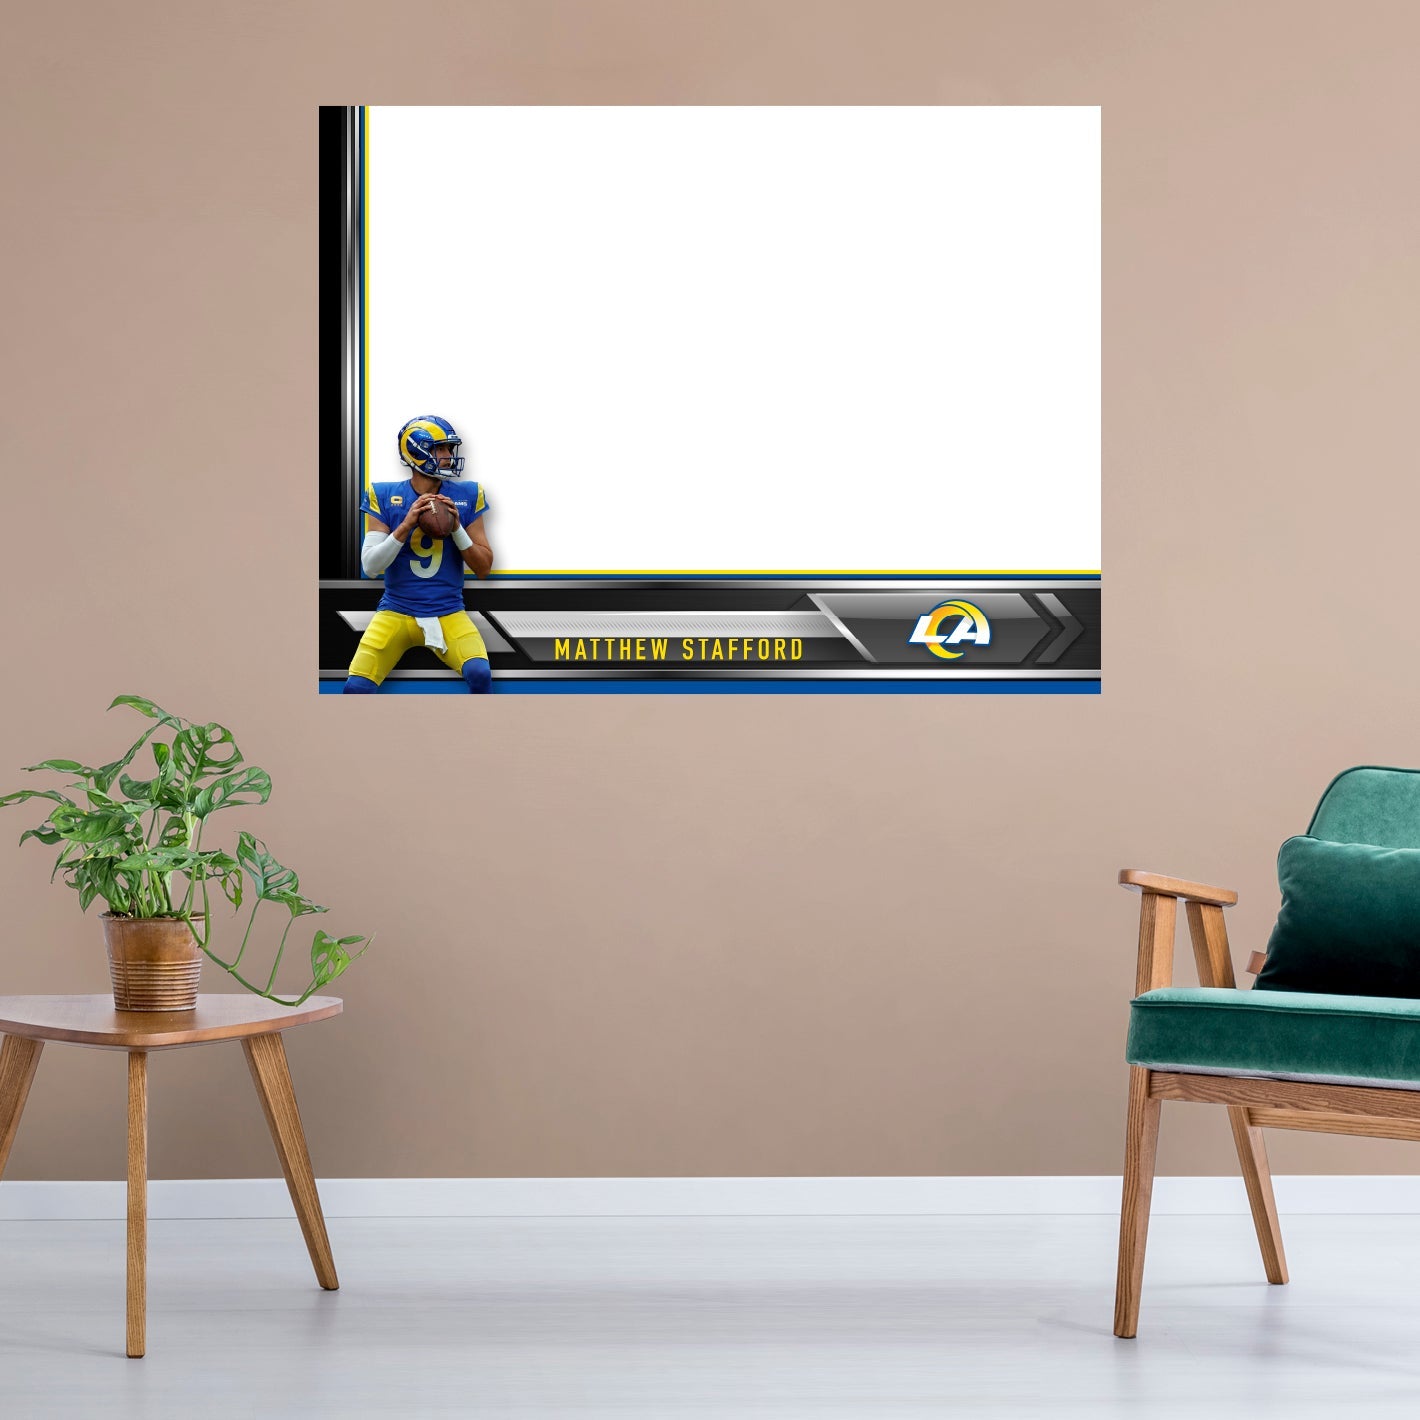 Los Angeles Rams: Matthew Stafford Dry Erase Whiteboard - Officially Licensed NFL Removable Adhesive Decal